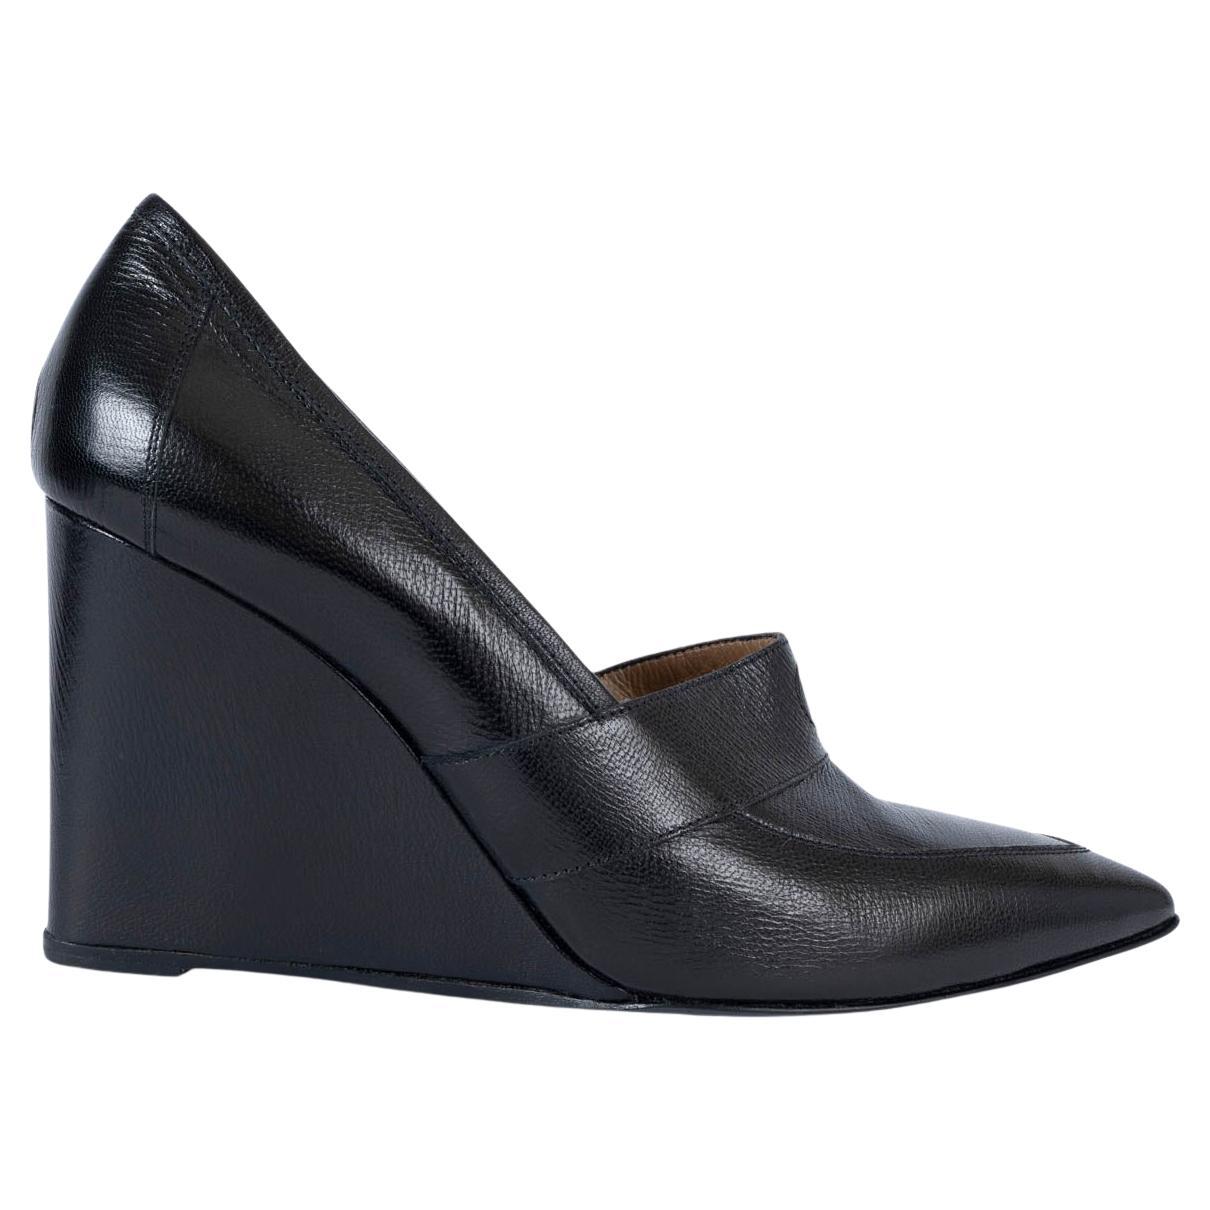 HERMES black leather POINTED TOE WEDGE Pumps Shoes 39 For Sale